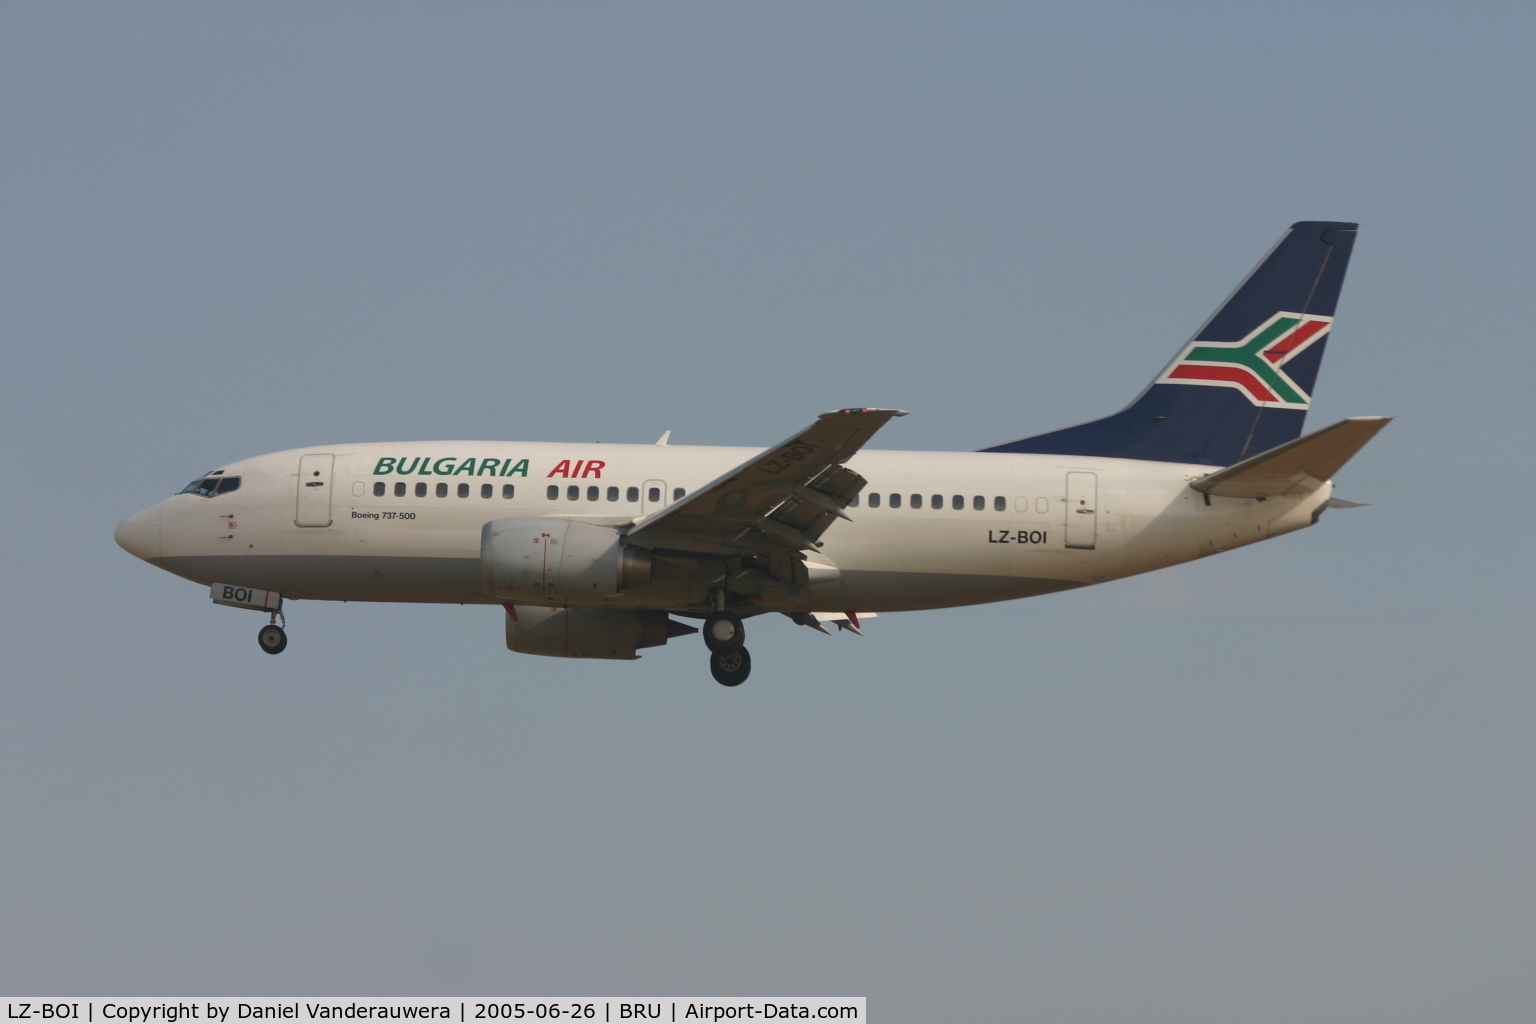 LZ-BOI, 1991 Boeing 737-530 C/N 25311, with national colours on tail